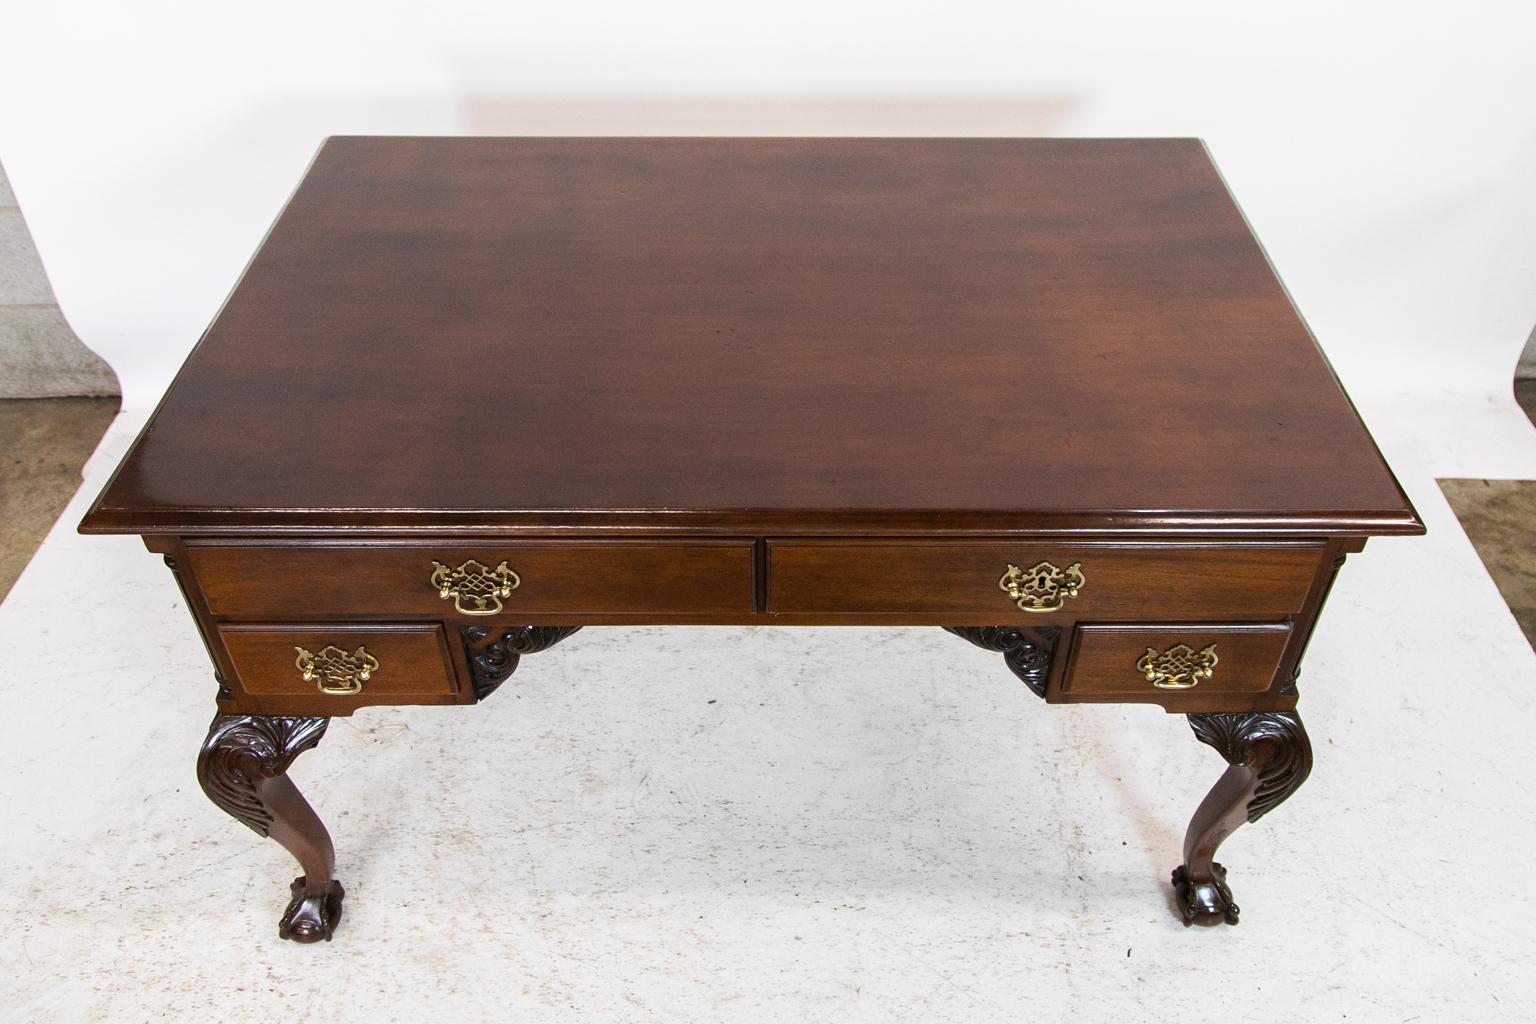 This writing desk is finished on all four sides. The ends have fluted quarter columns. The legs and knuckles have acanthus leaves carved in high relief and terminate in ball and claw feet. The side aprons have carved arabesques. One side has all